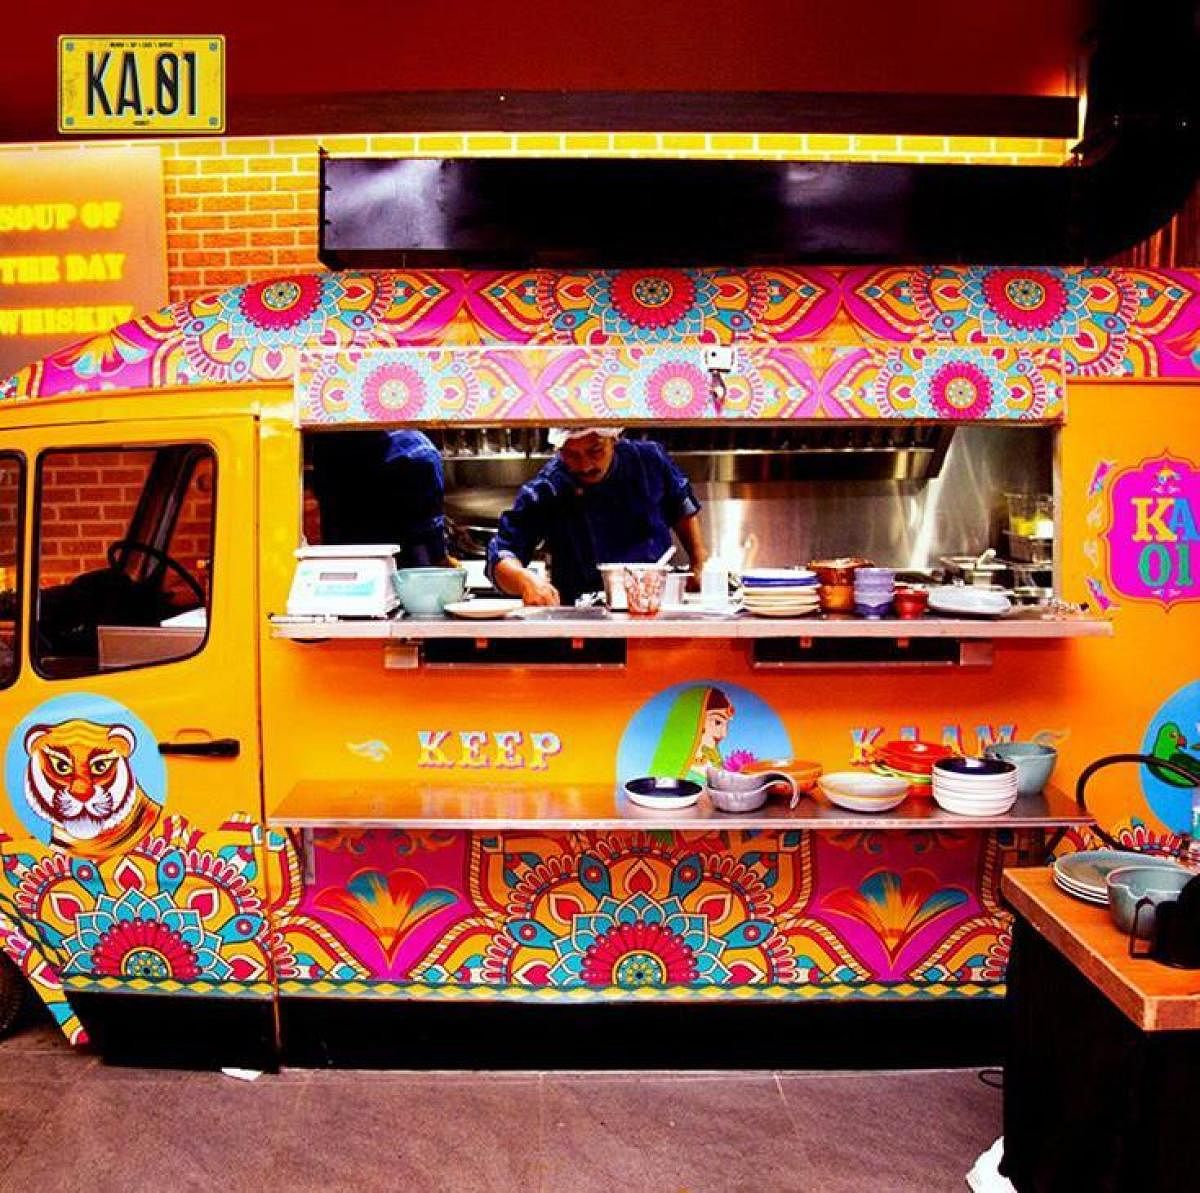 The kitchen is a colourful caravan.